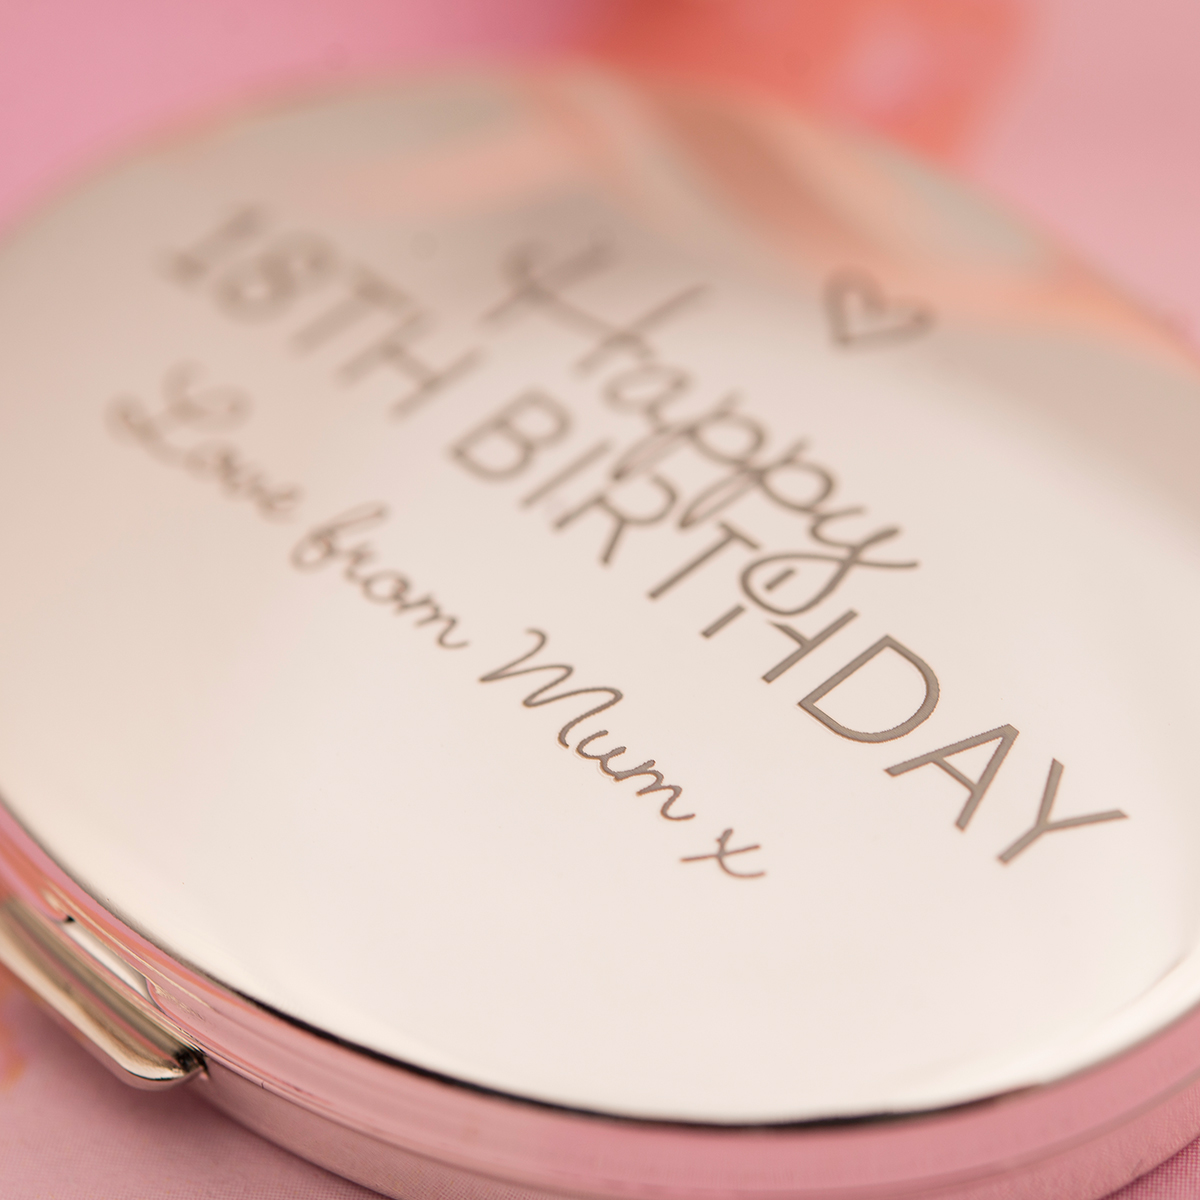 Engraved Silver Oval Compact Mirror - Happy 18th Birthday